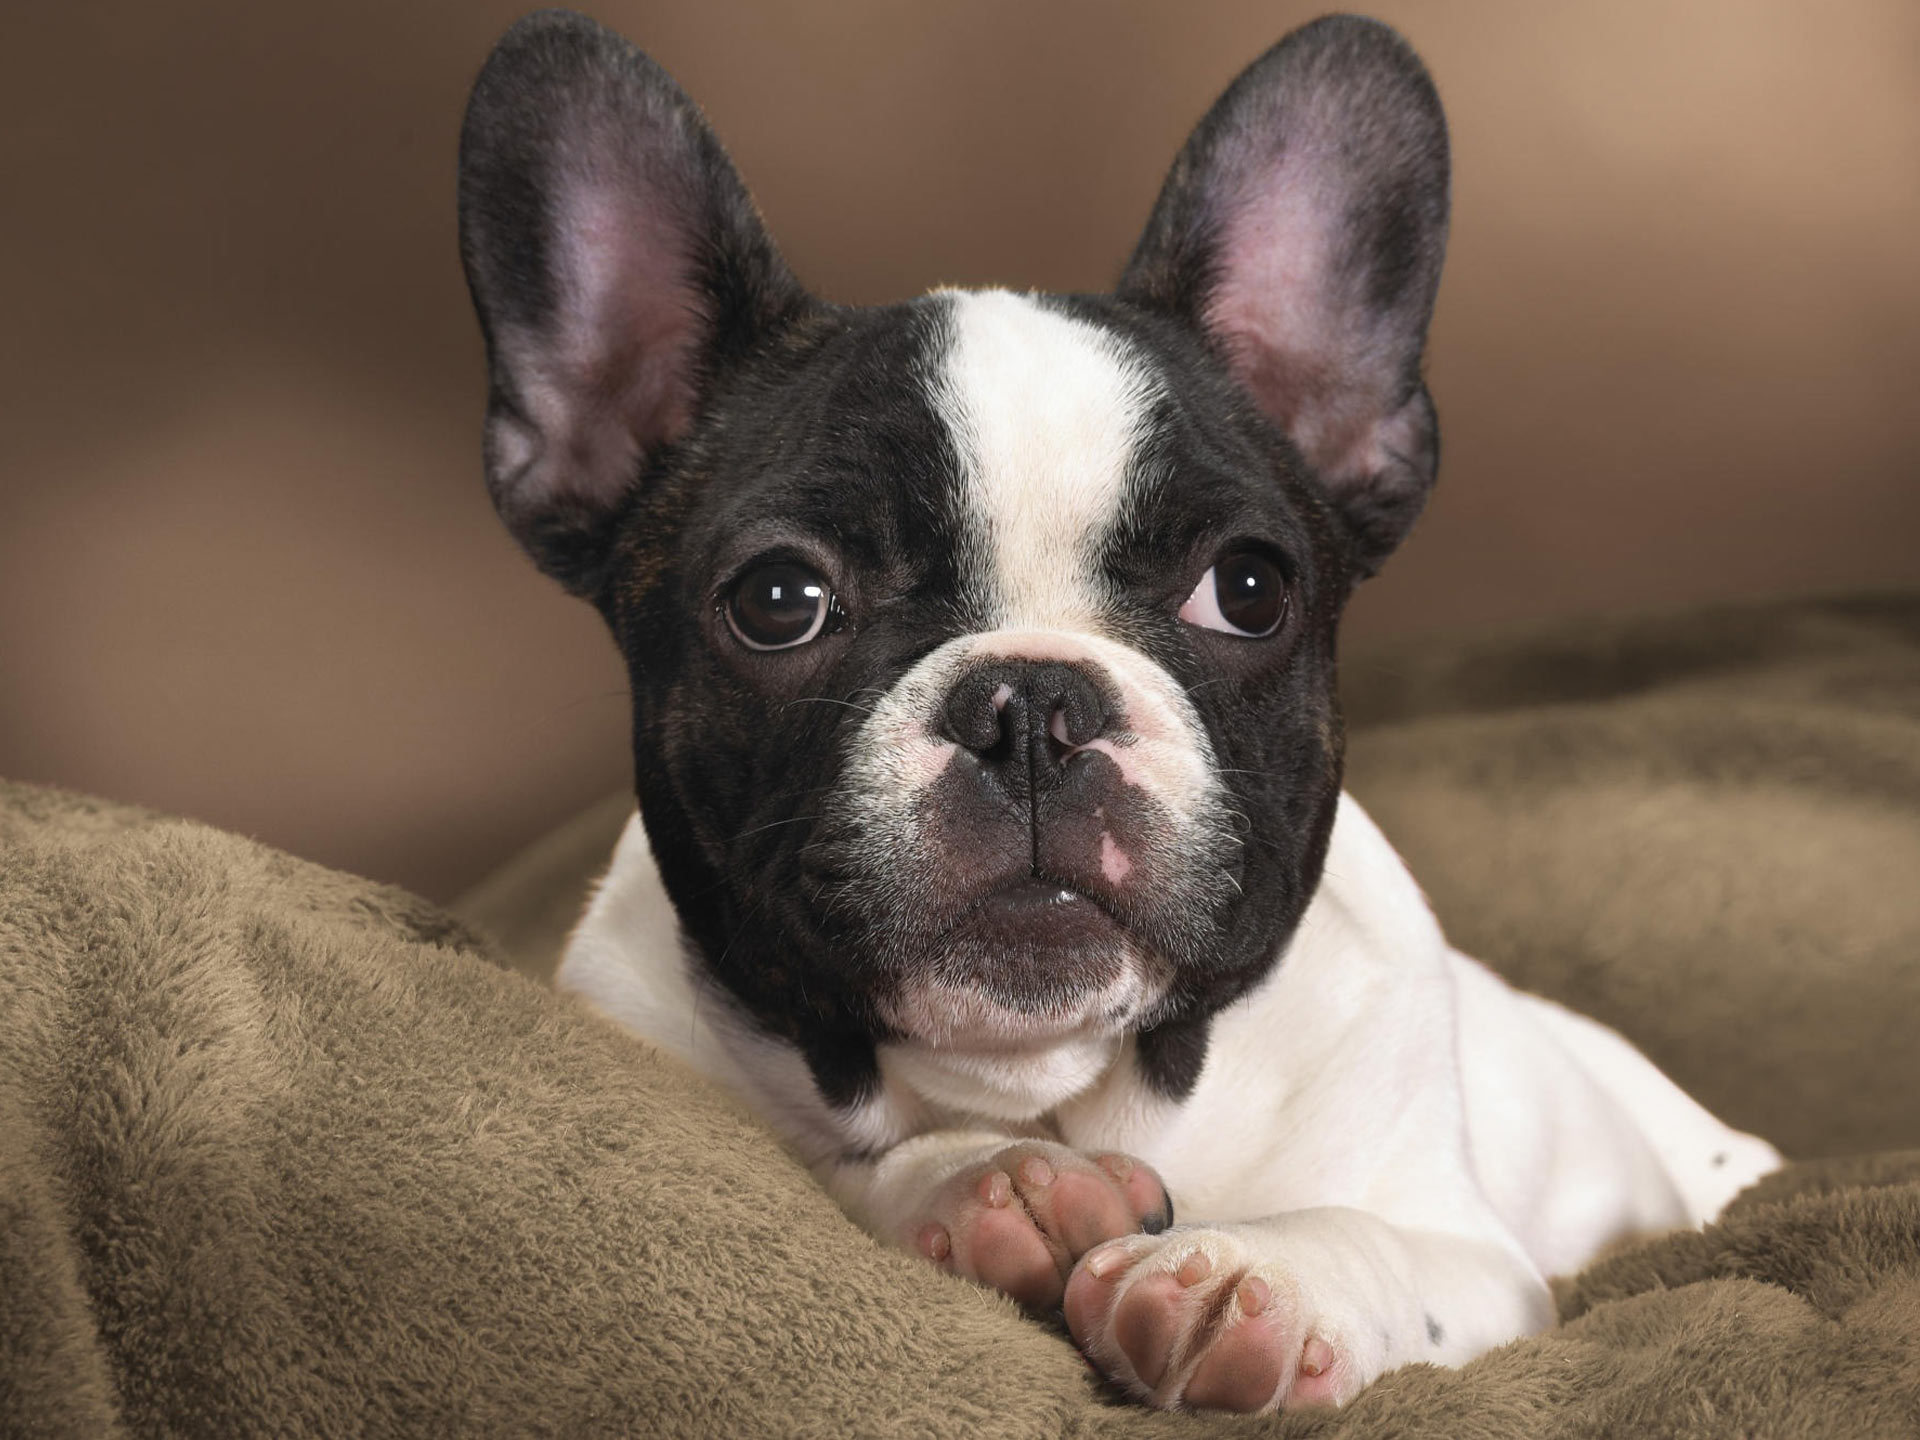 Dogs Image Boston Terrier HD Wallpaper And Background Photos